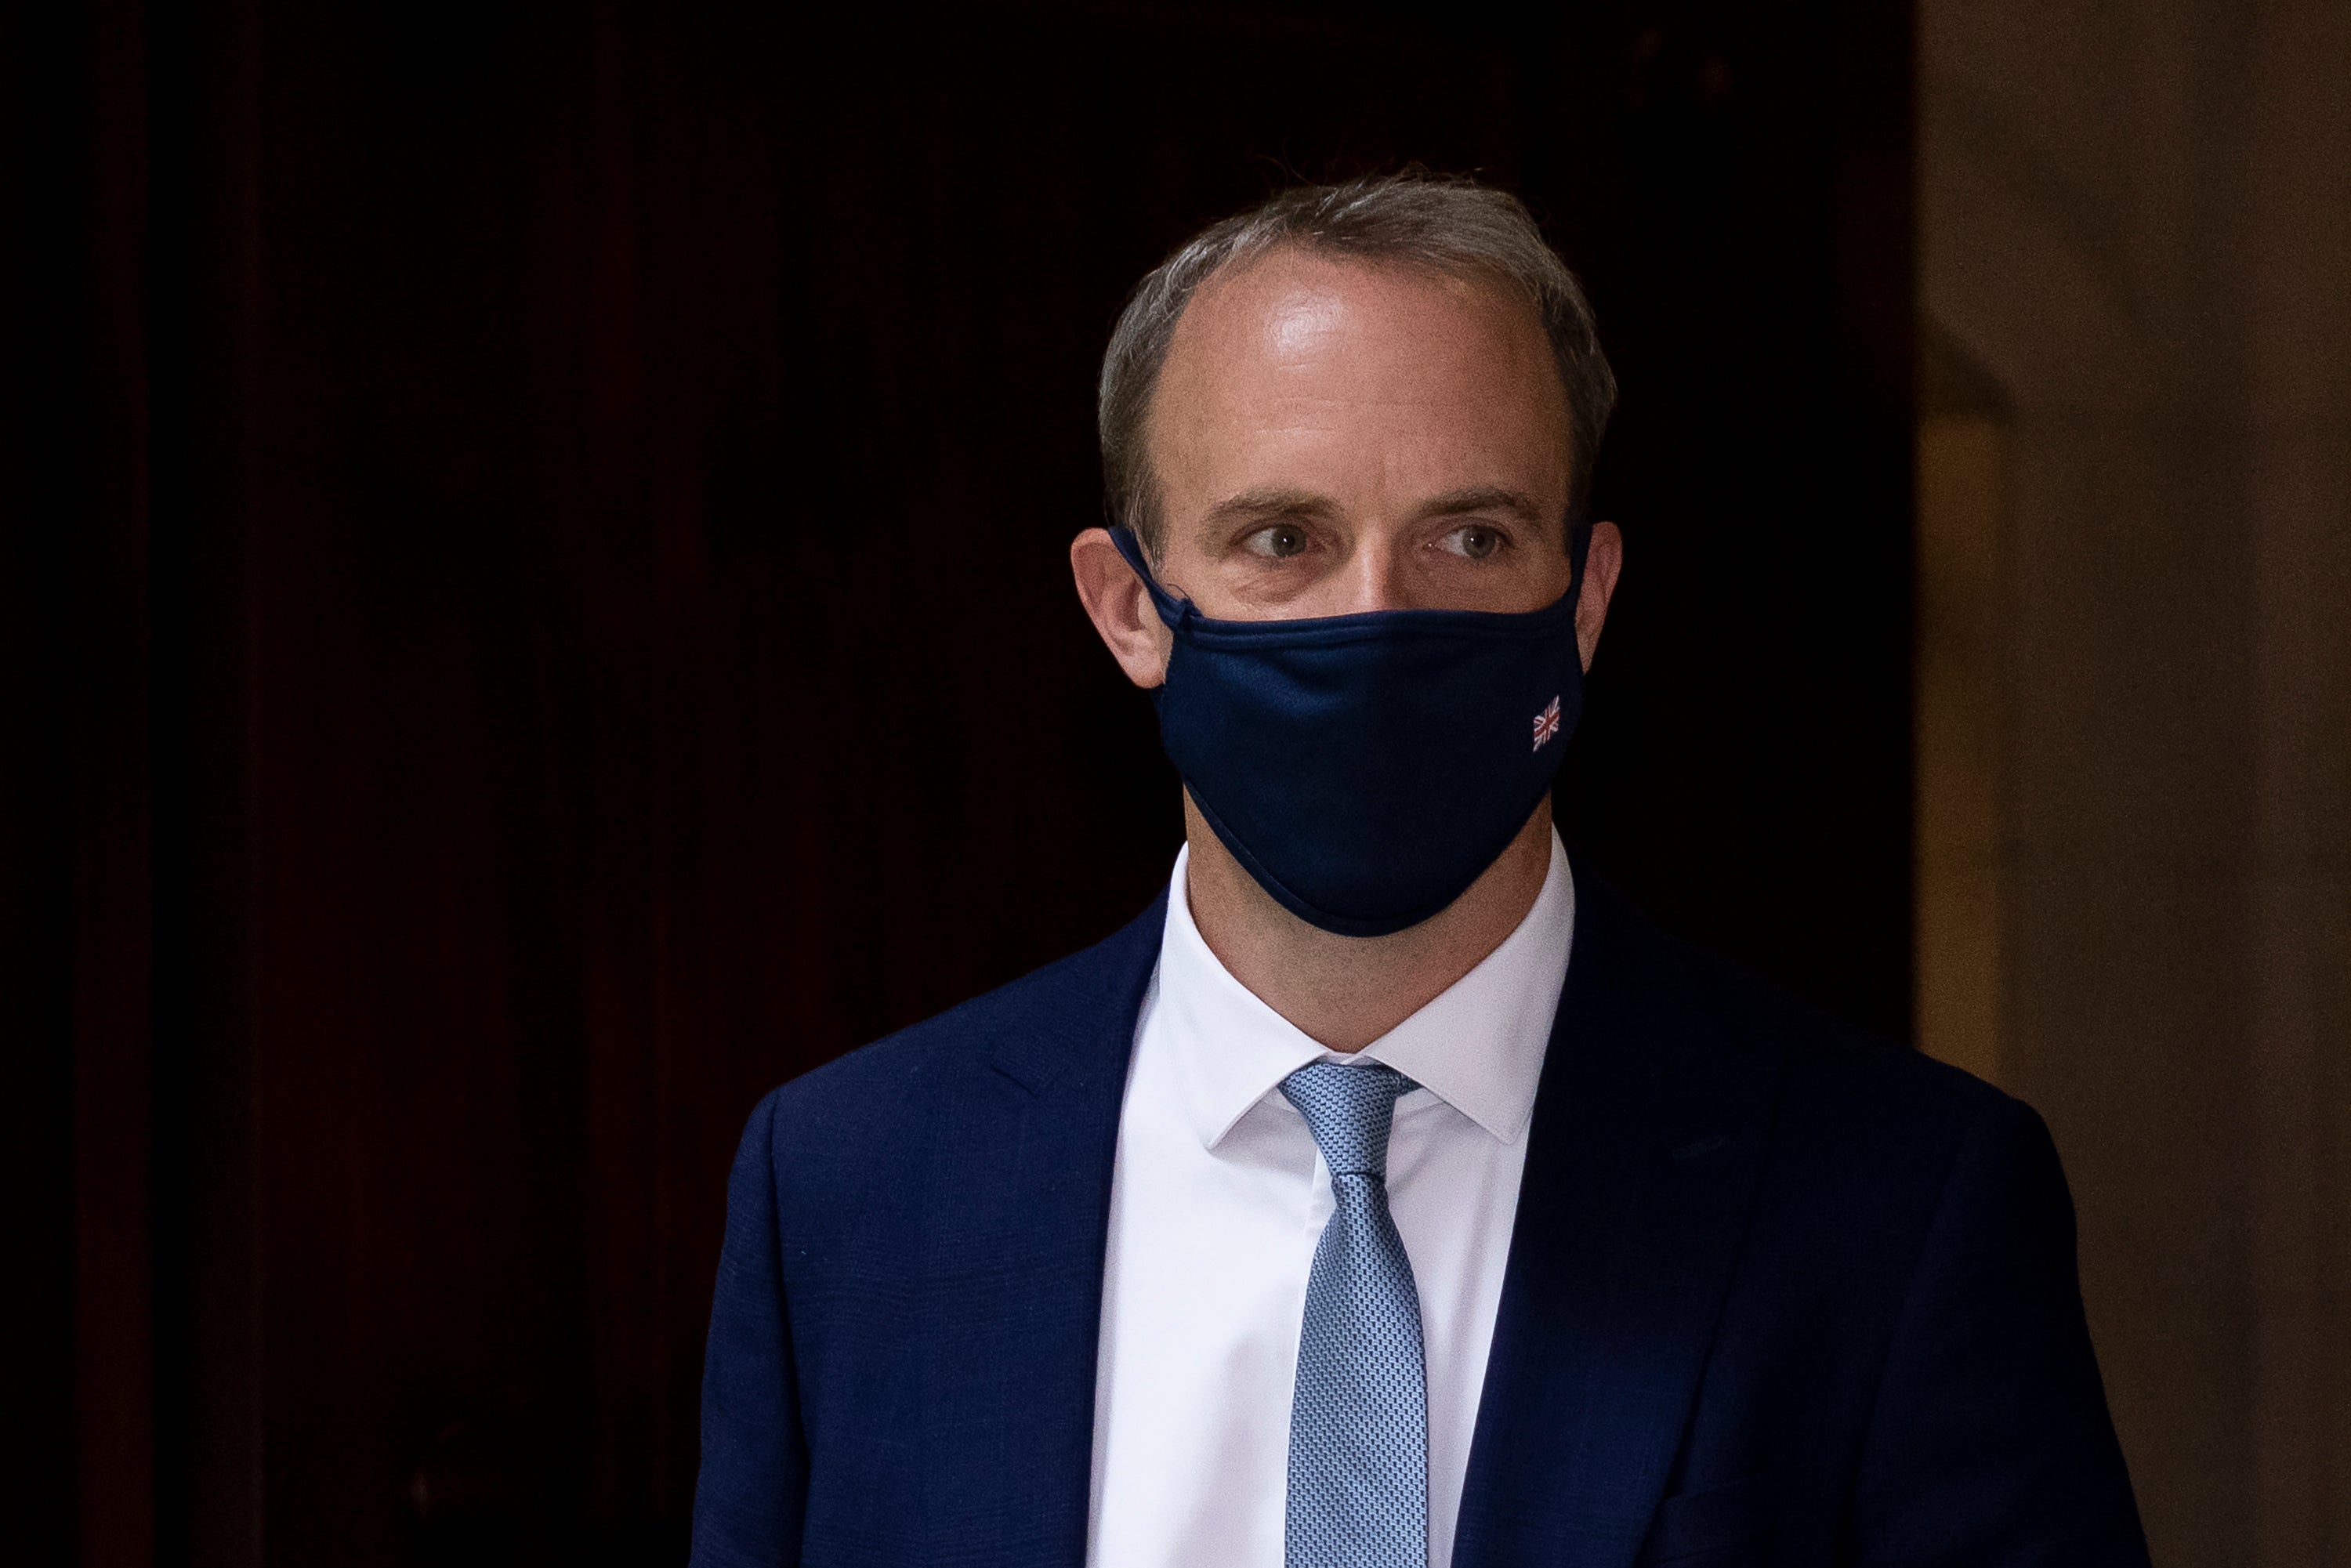 ‘In his younger, pamphleteering days, Raab had no sympathy for caps and quotas on refugees’